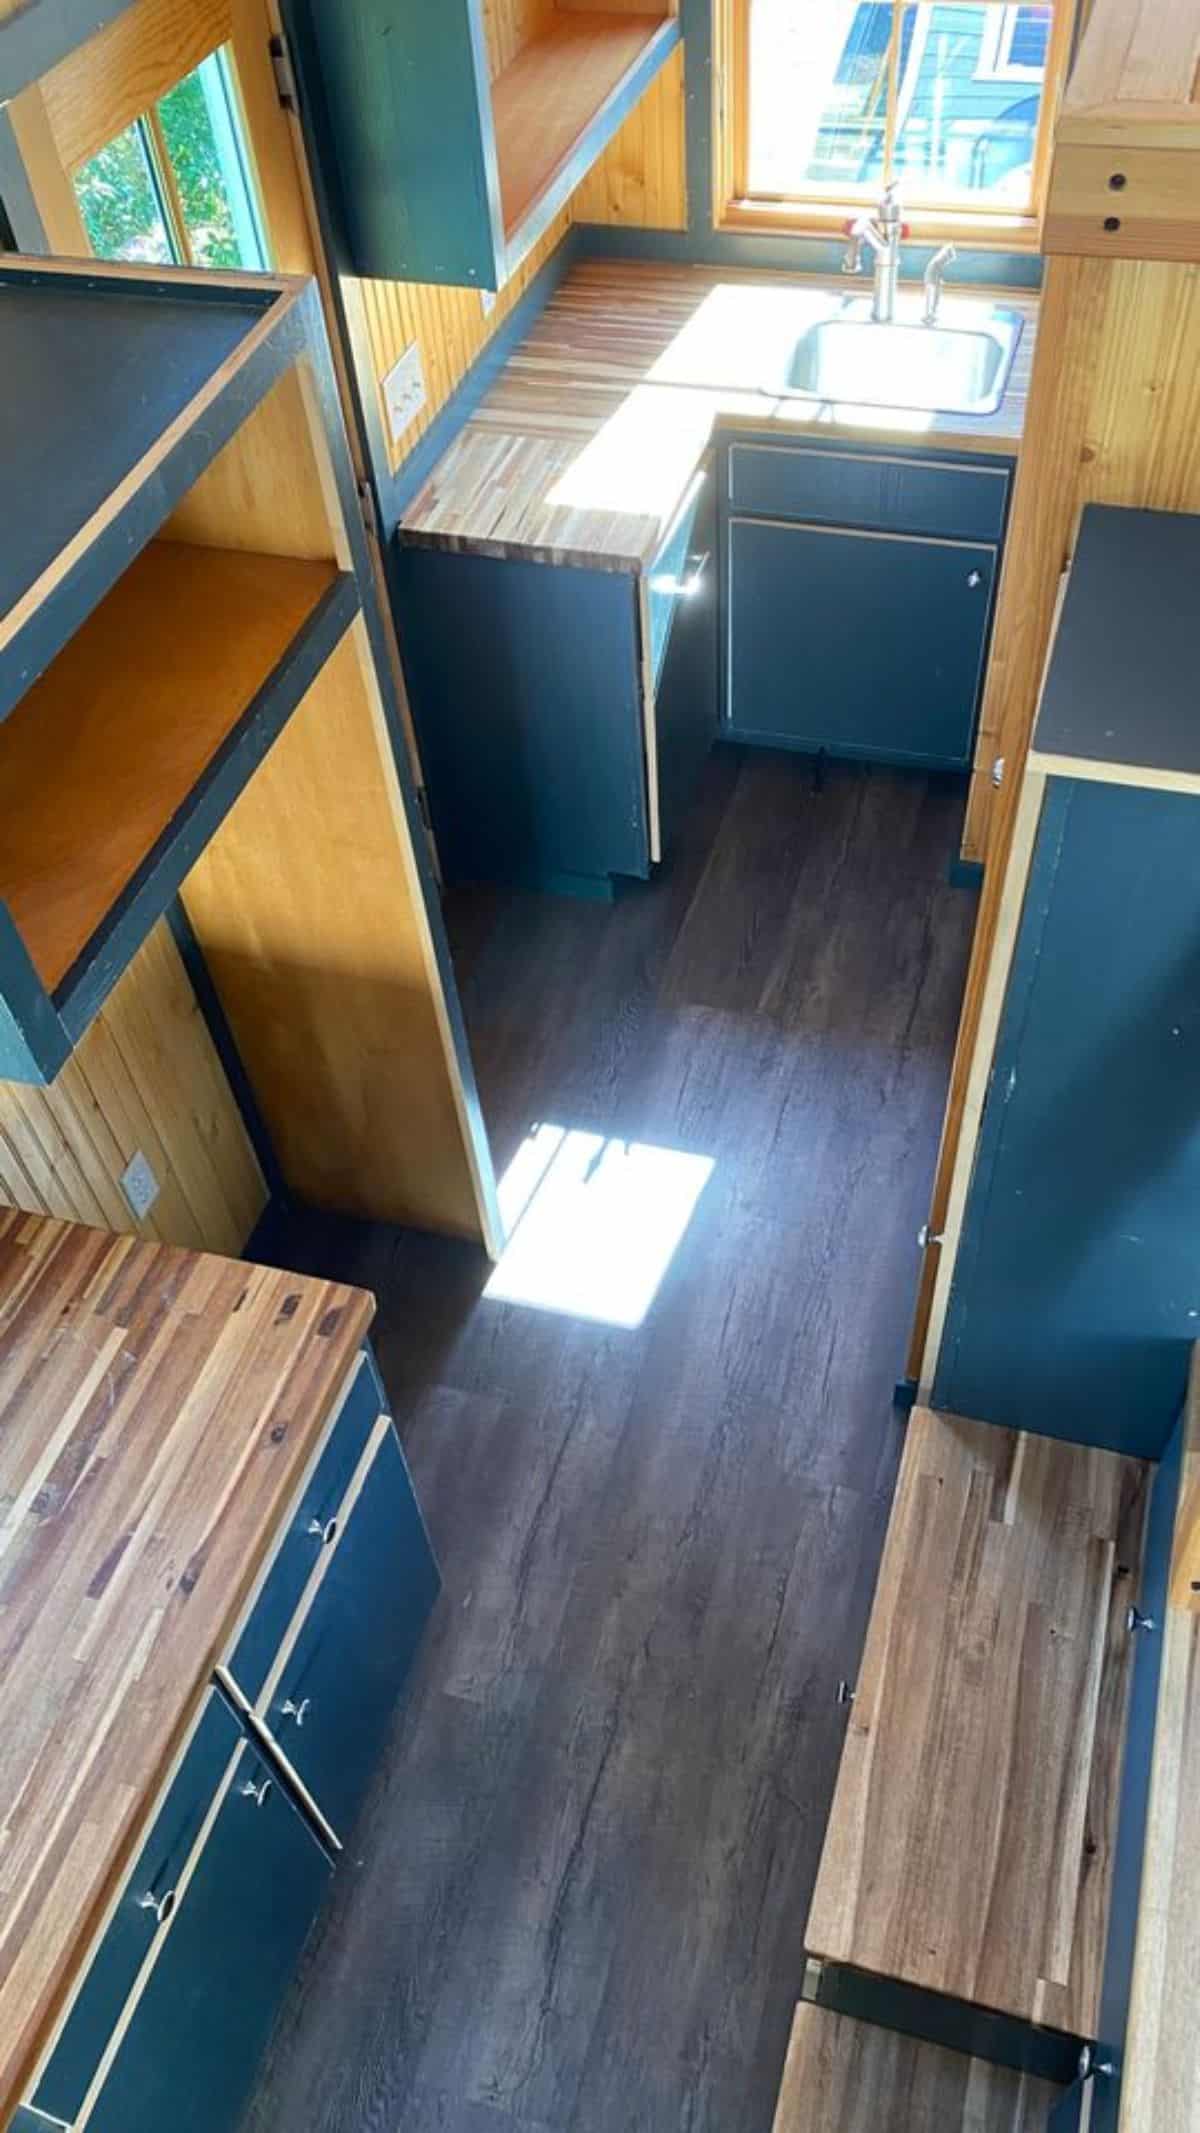 Kitchen area of 20’ Cozy Tiny House is L shaped